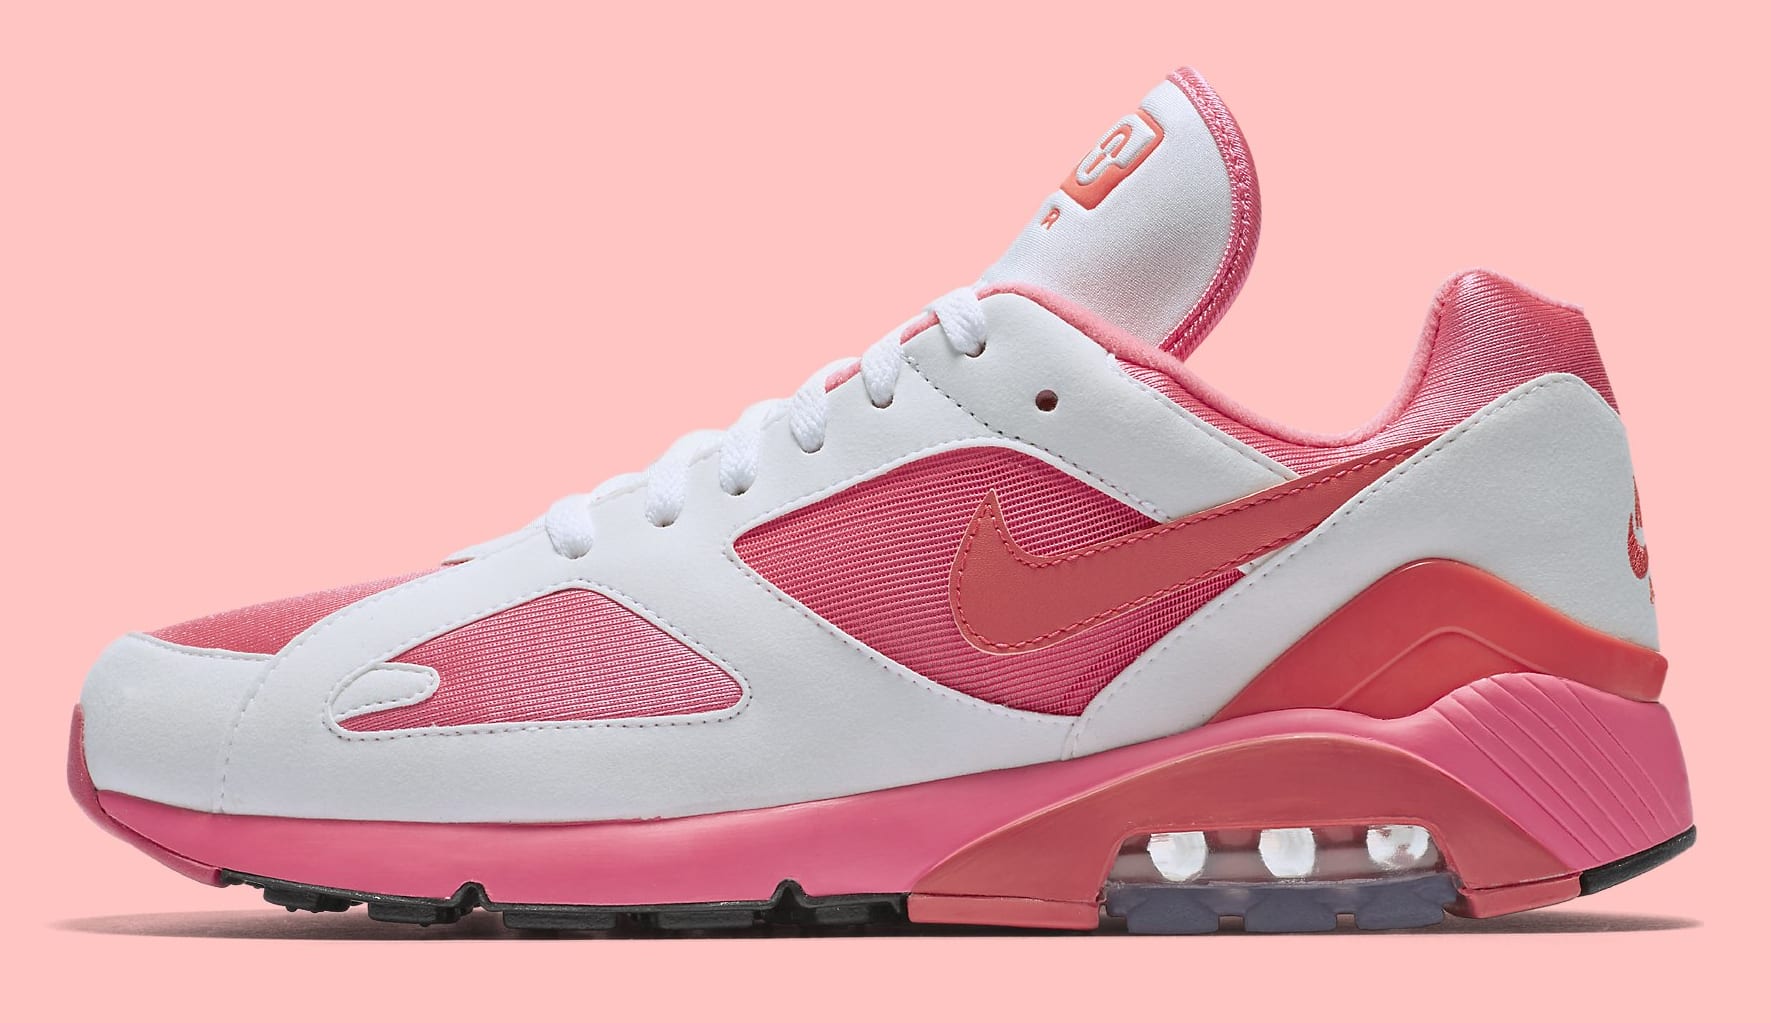 Perspectiva Siempre Viscoso Is Comme des Garçons' Air Max 180 Collab Getting a Wider Release? | Complex